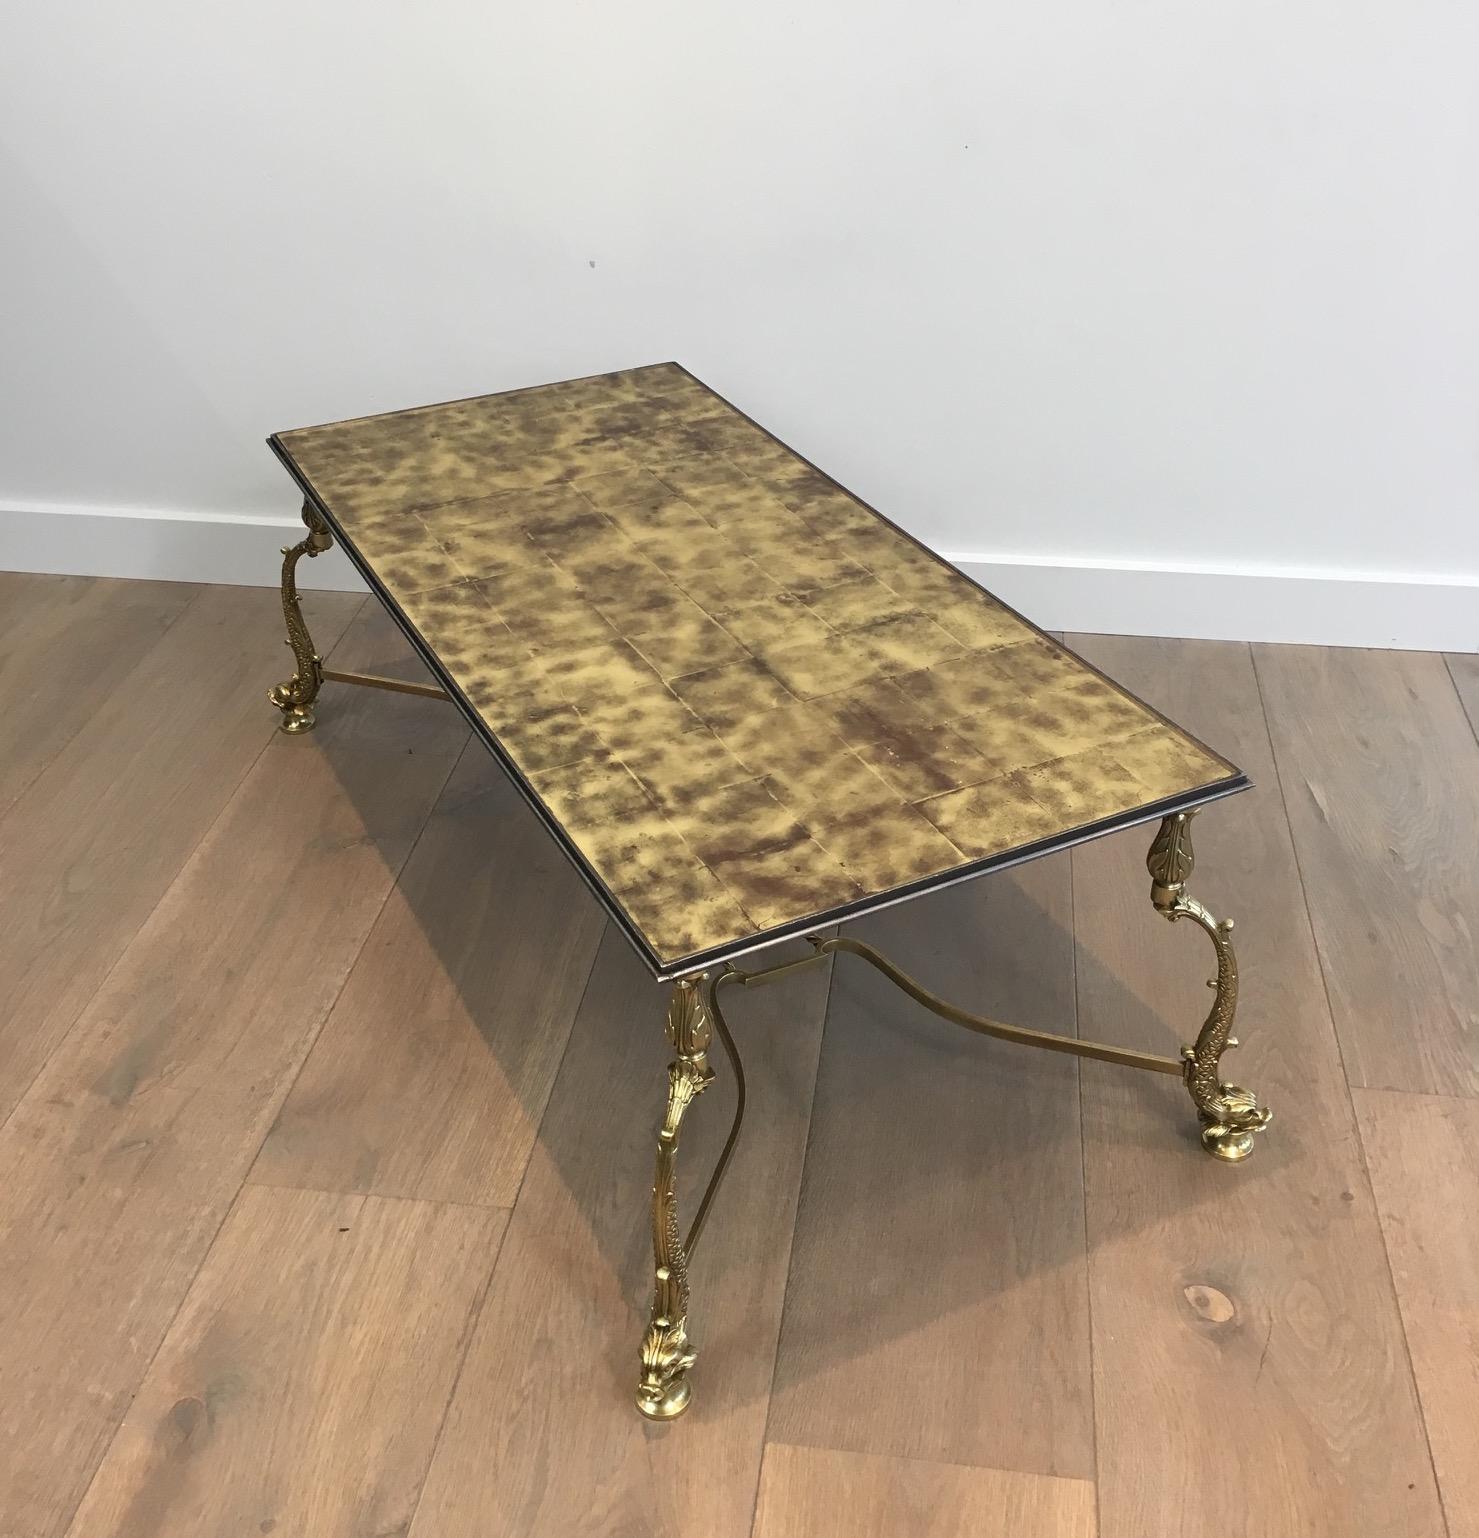 This rare and beautiful neoclassical stytle coffee table is made of brass. It has elegant dolphin feet joined by a stretcher with brass rope on which centre is a decoration. The top is made of a beautiful under glass gold paper marquetry surrounded